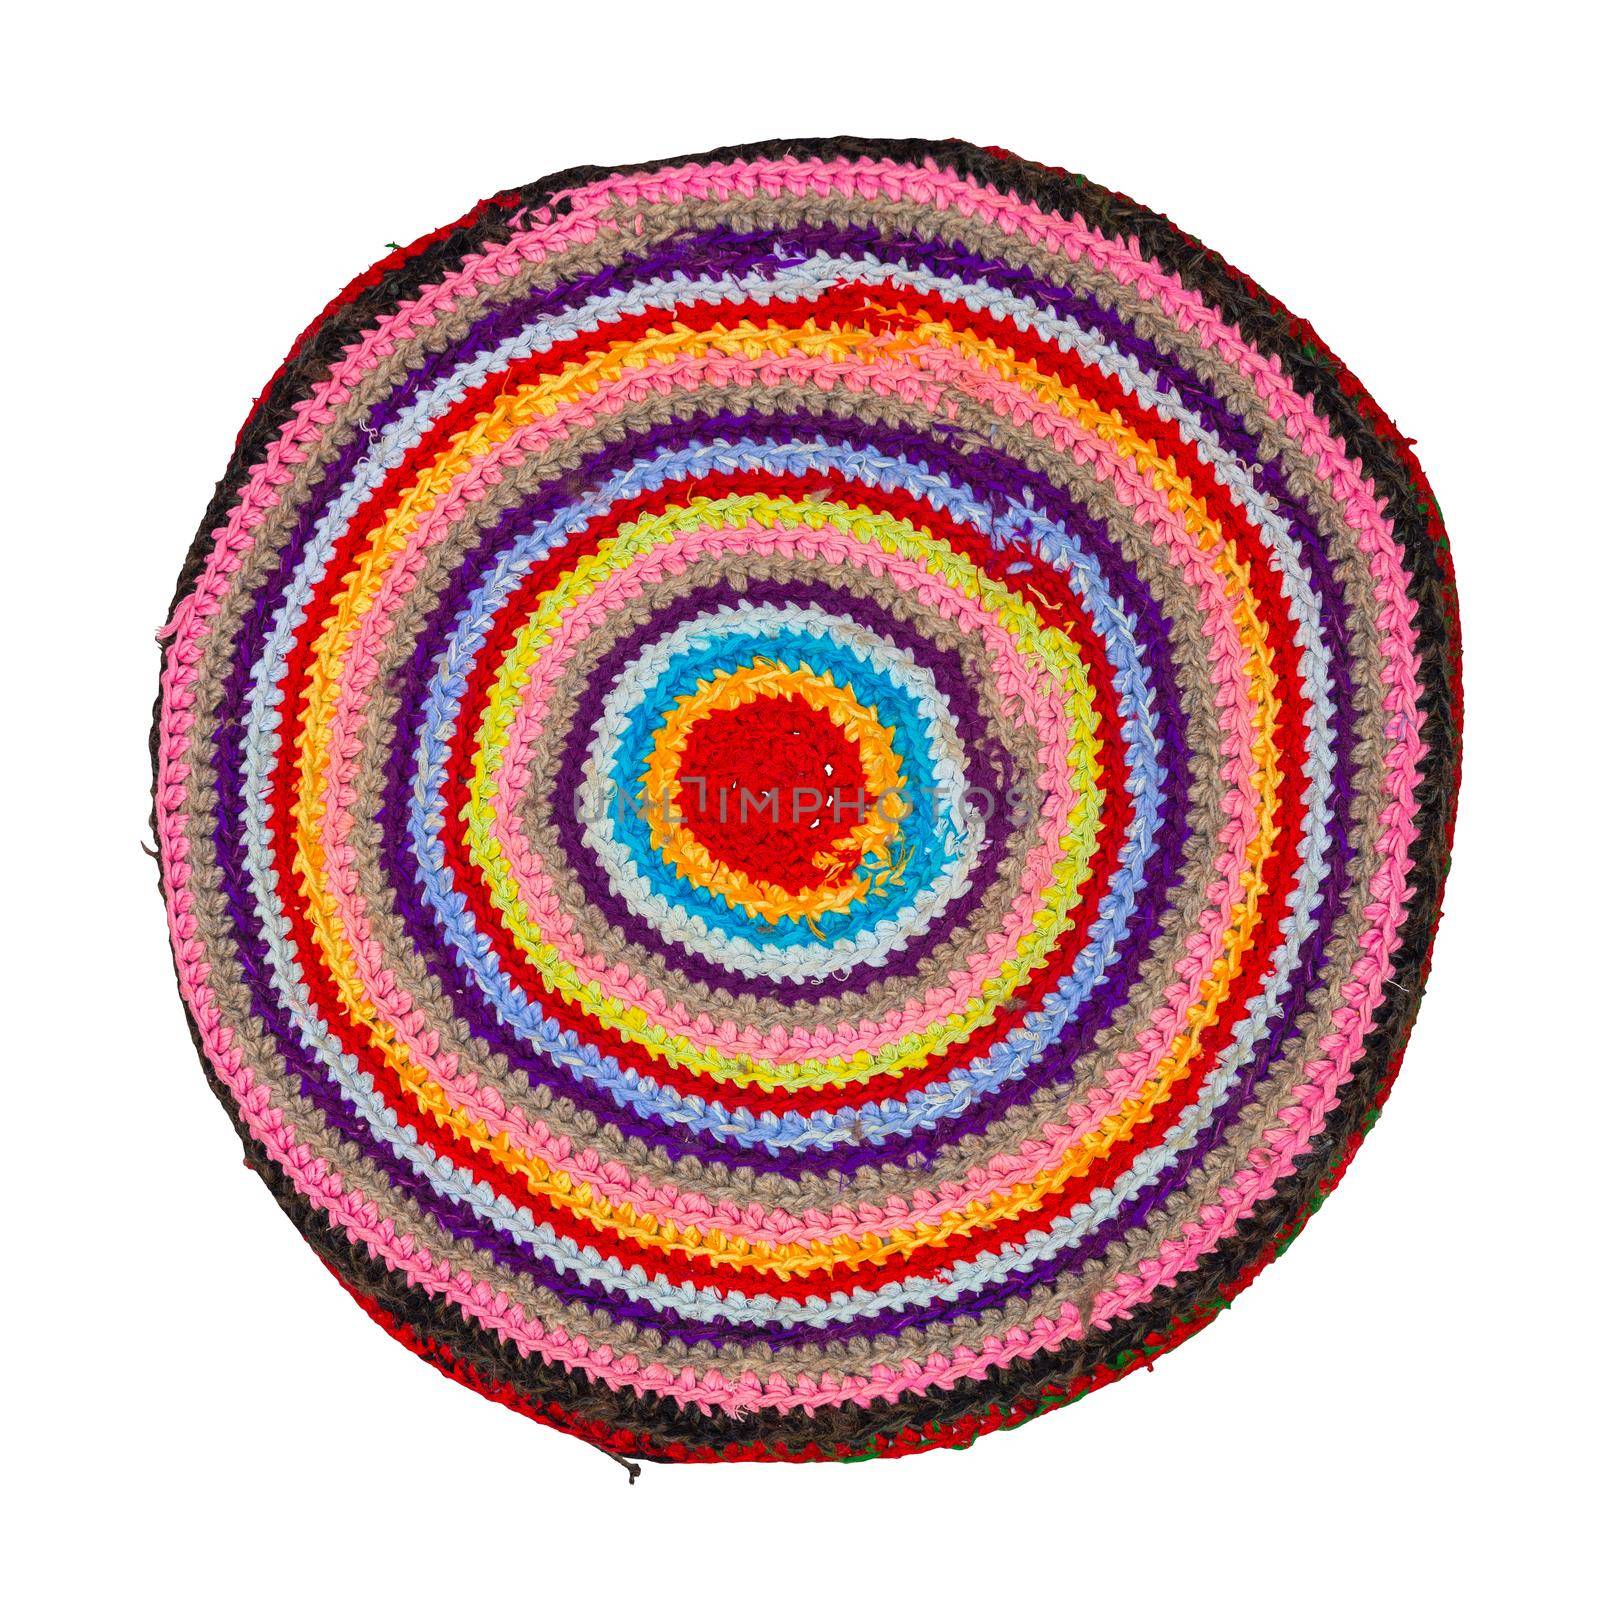 Traditional Russian round knit Mat handmade by z1b